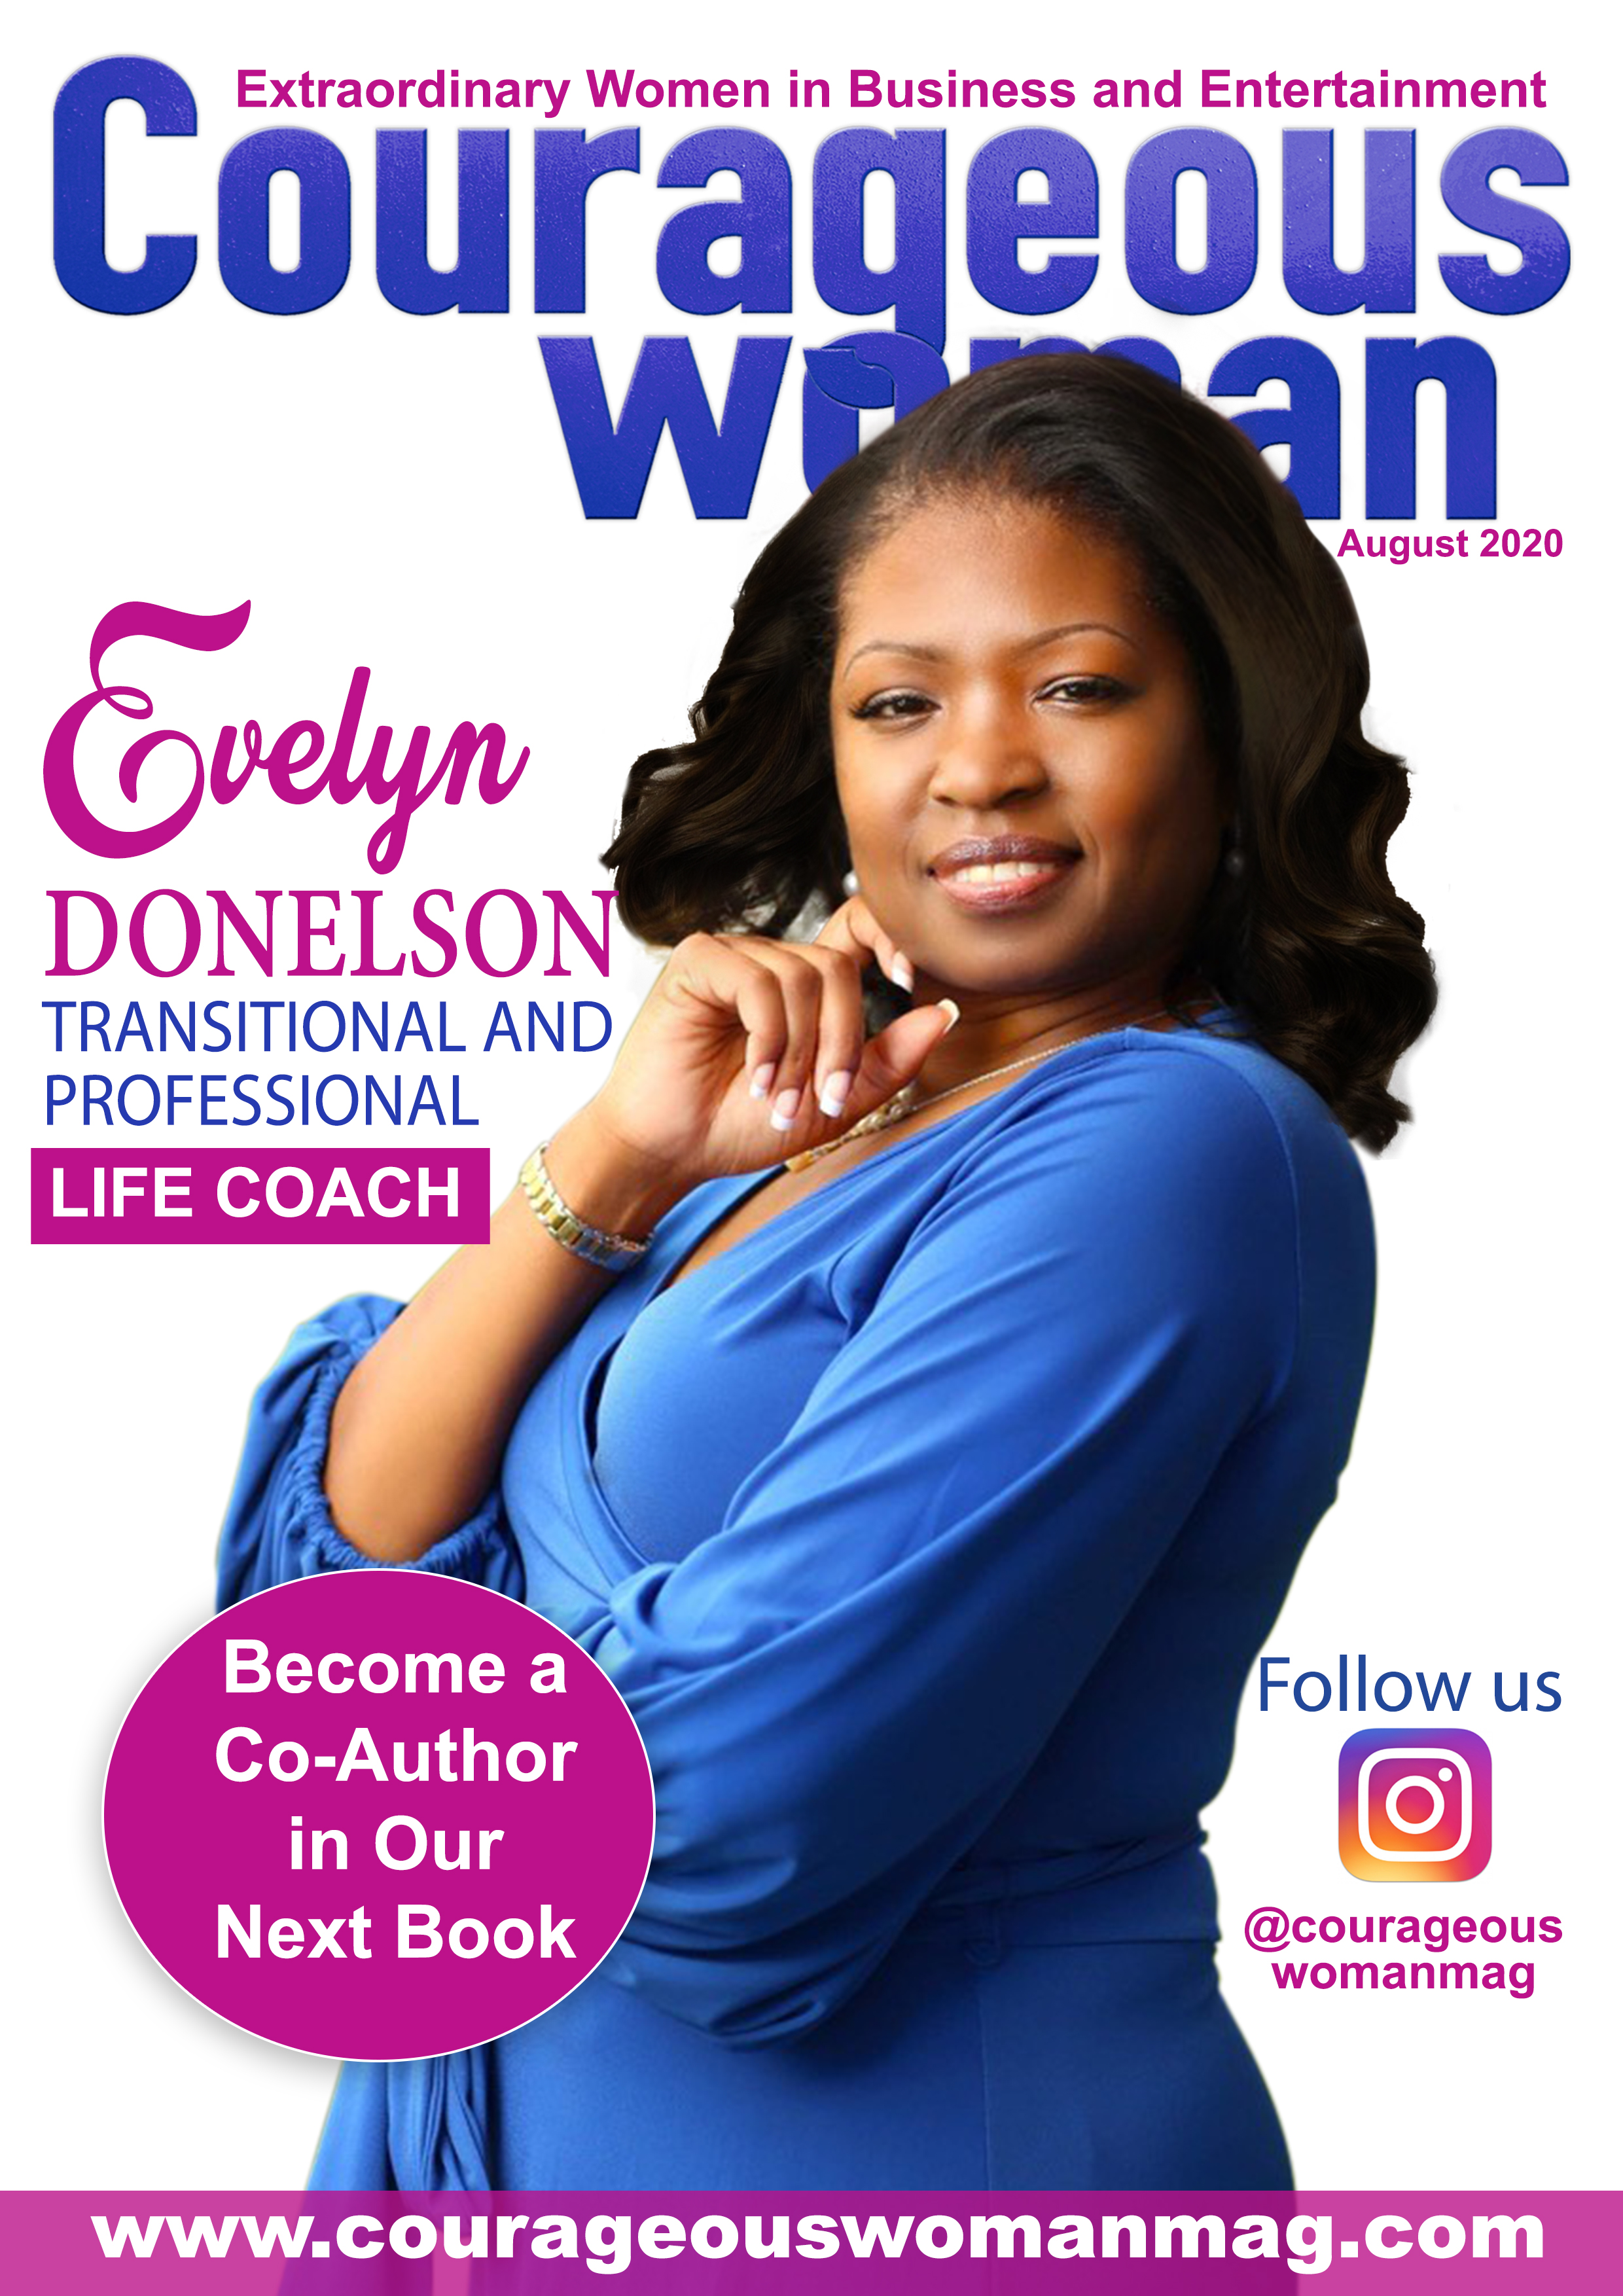 Courageous-woman-magazine-evelyn-donelson